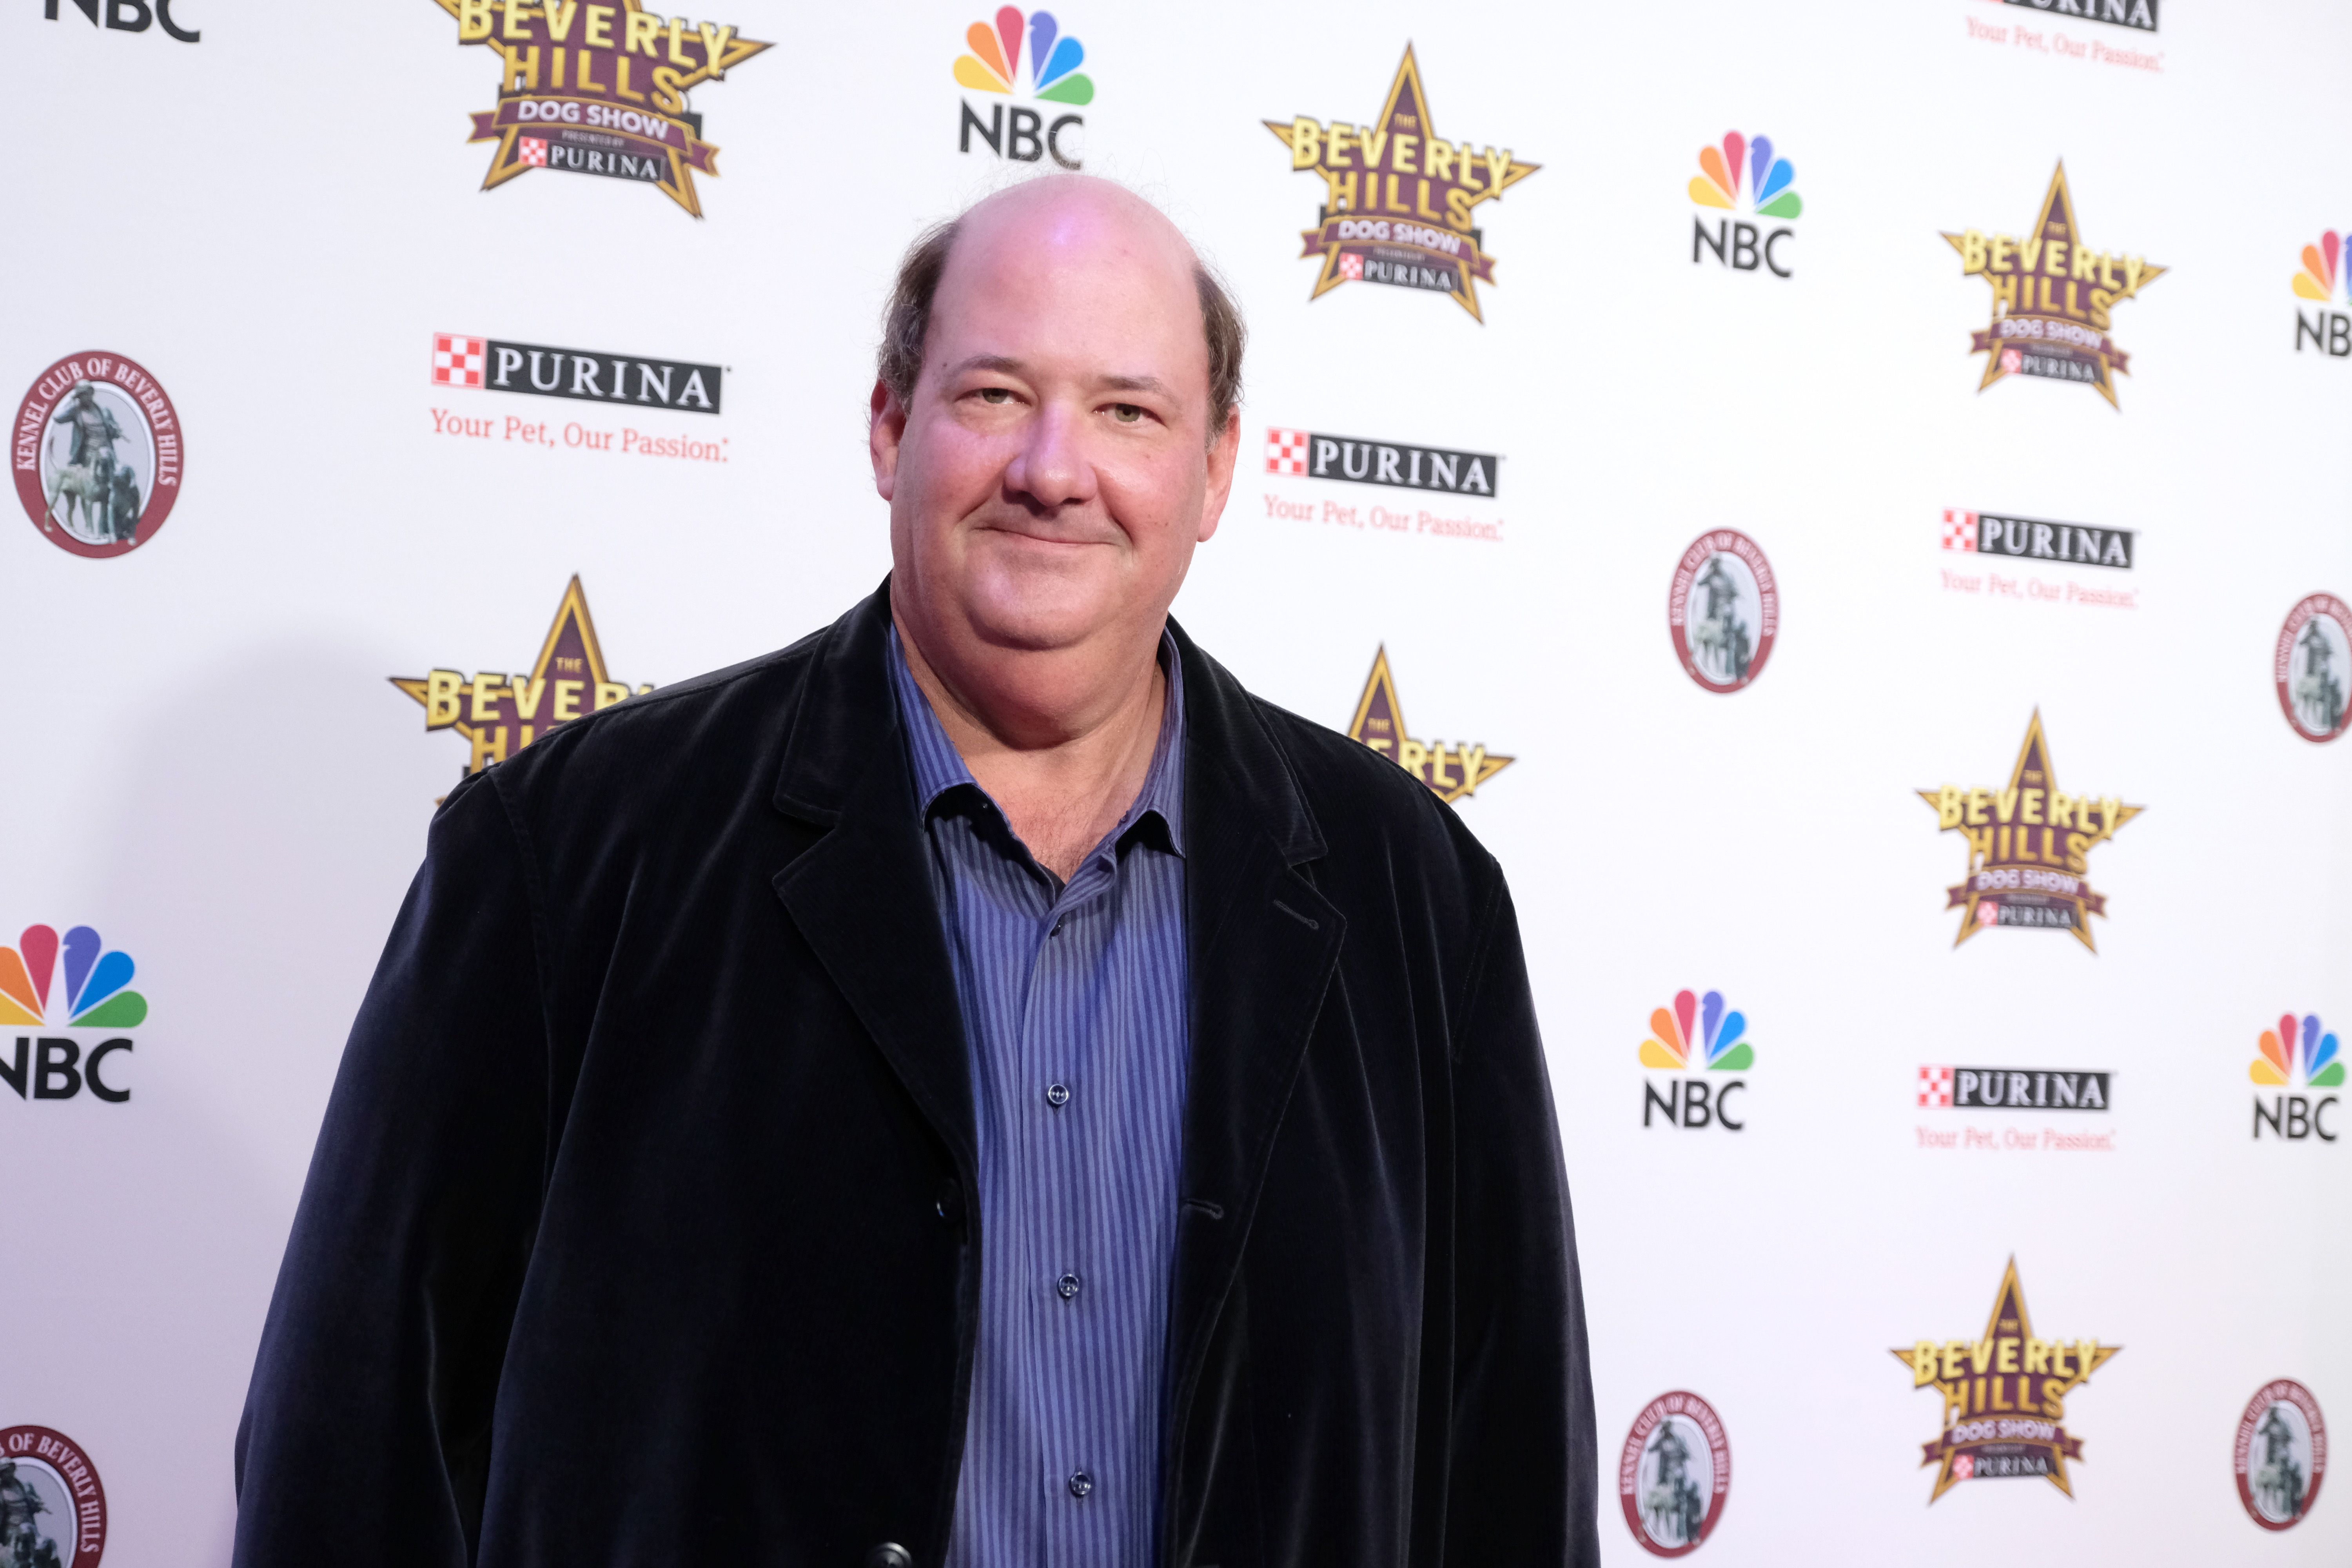 Brian Baumgartner at the Los Angeles County Fairplex on February 29, 2020, in Pomona, California. | Source: Getty Images